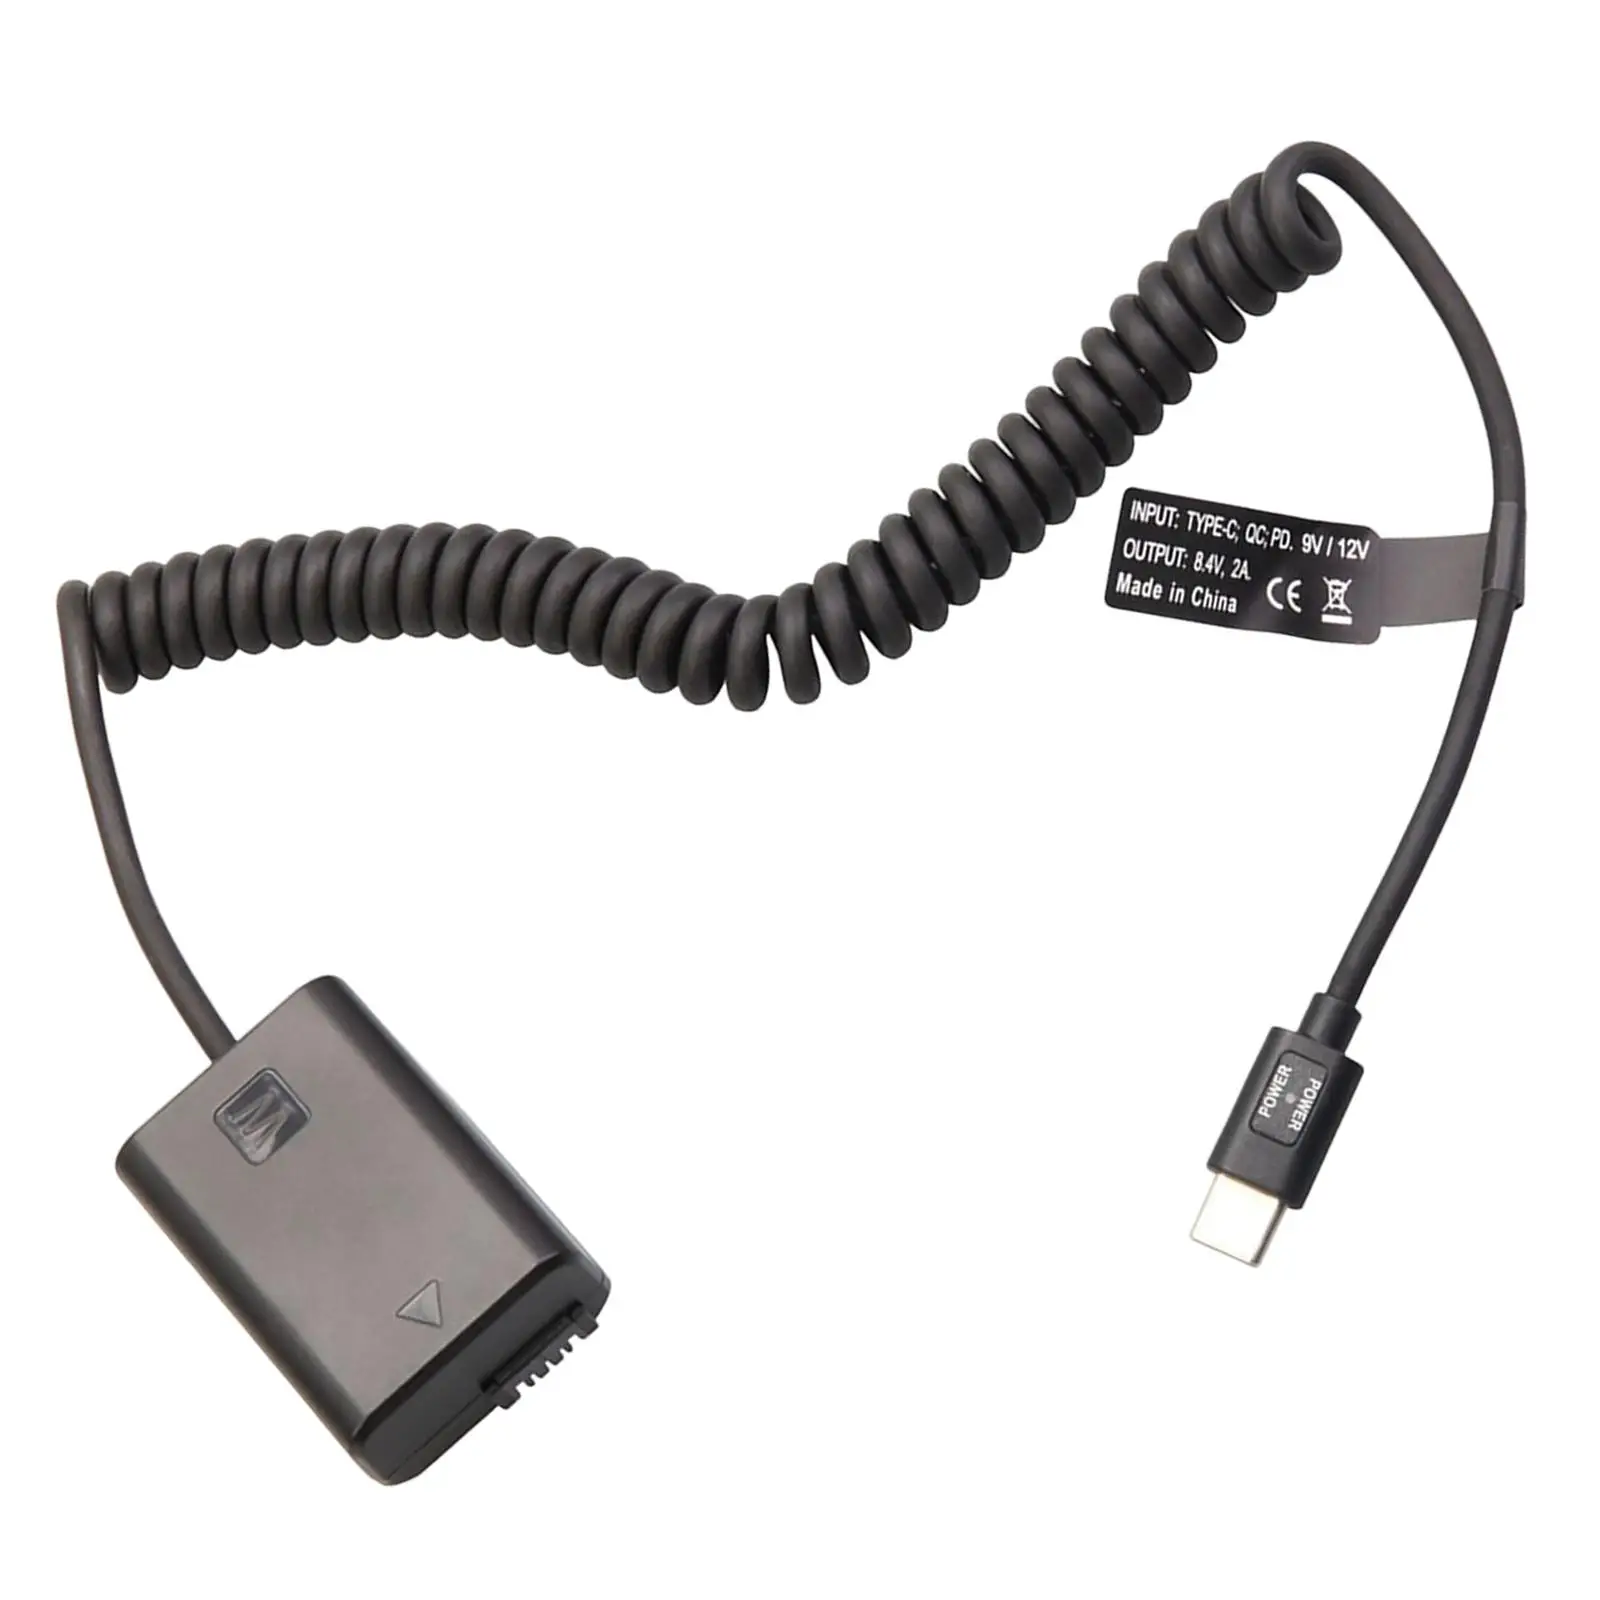 Np-Fw50 Dummy Battery Power Adapter with Type C Cable Replace for Sony A7M2 A6000 A5100 Cameras